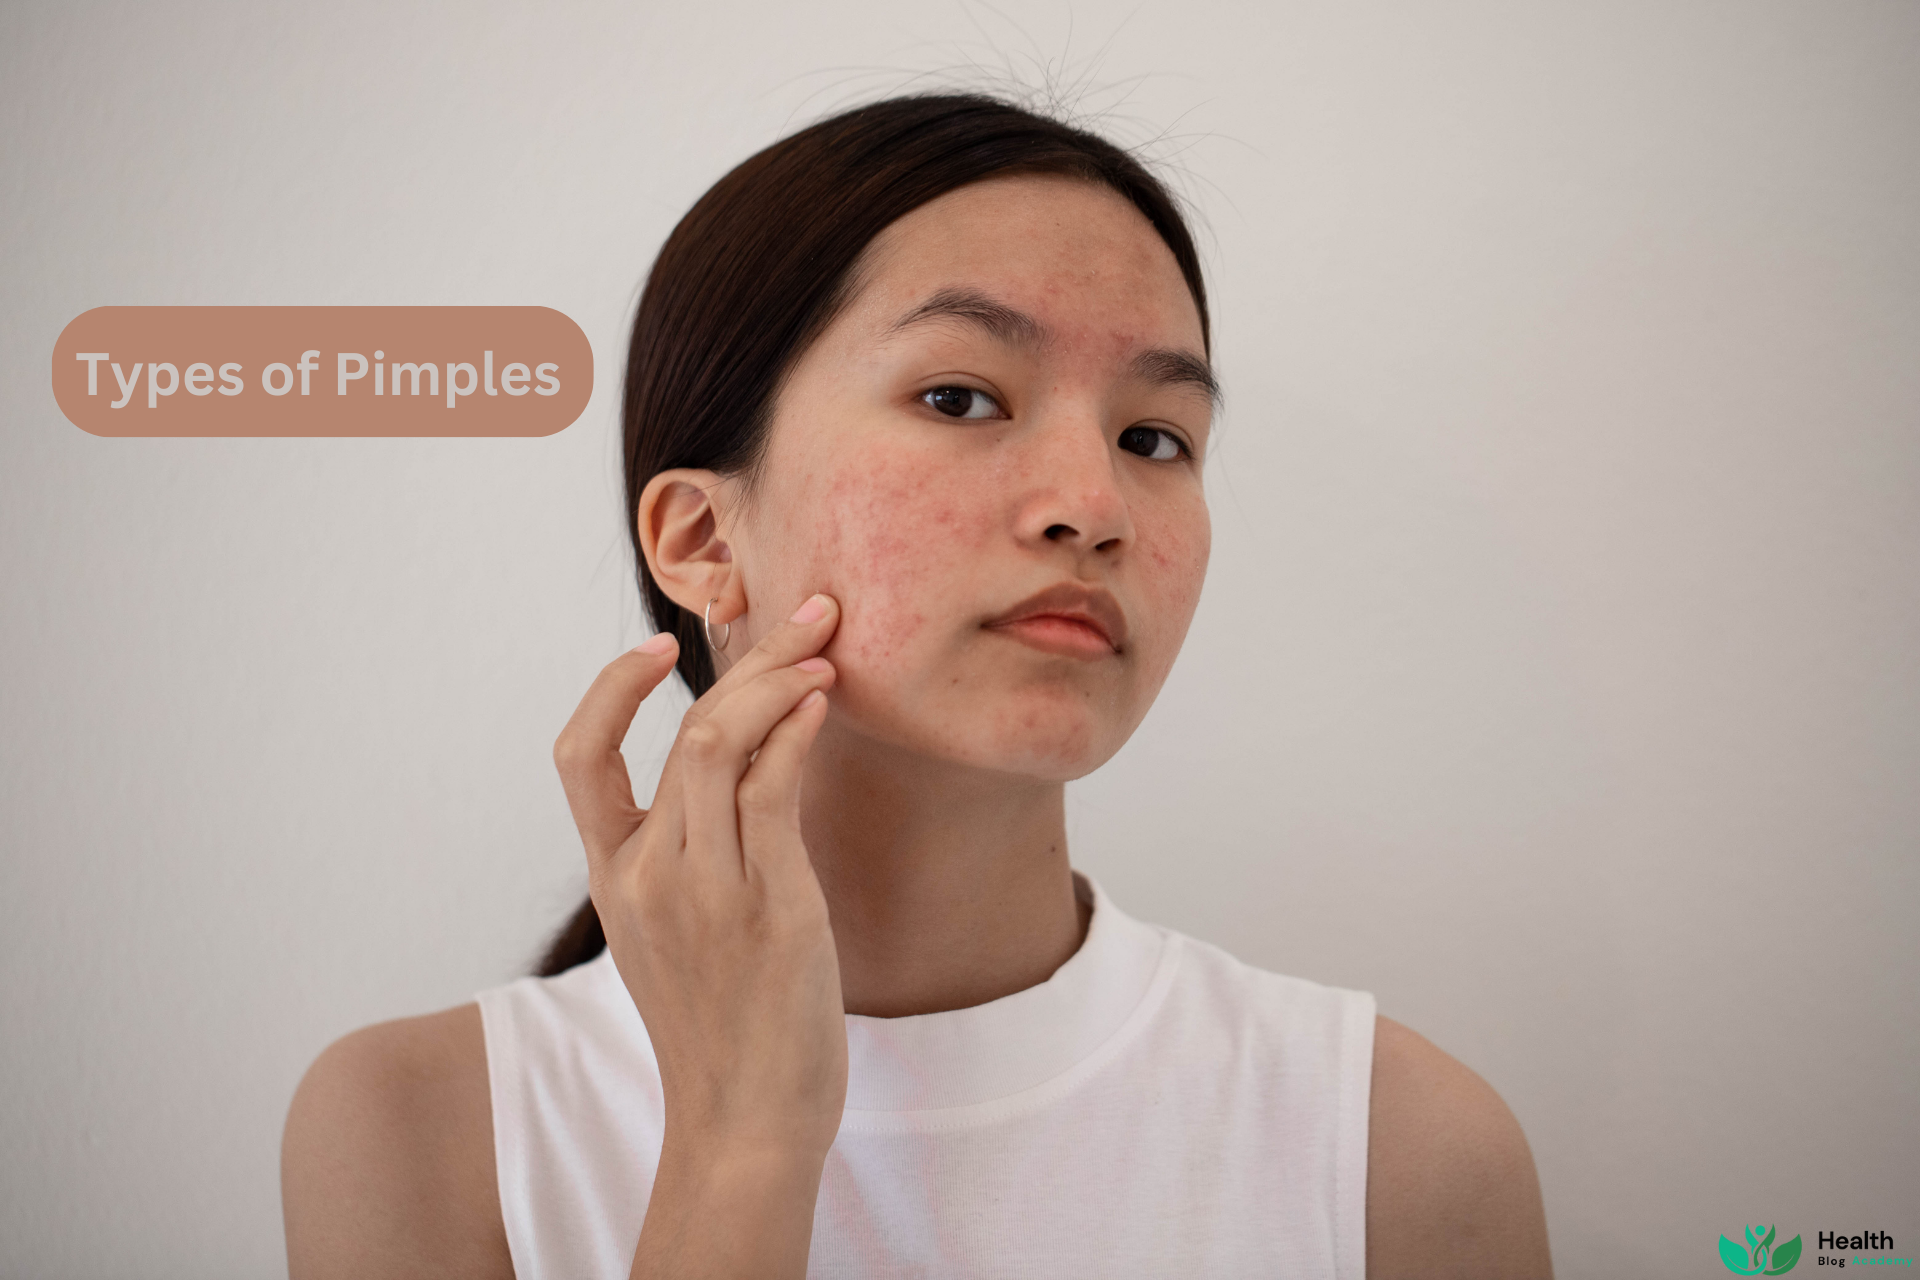 Types of Pimples